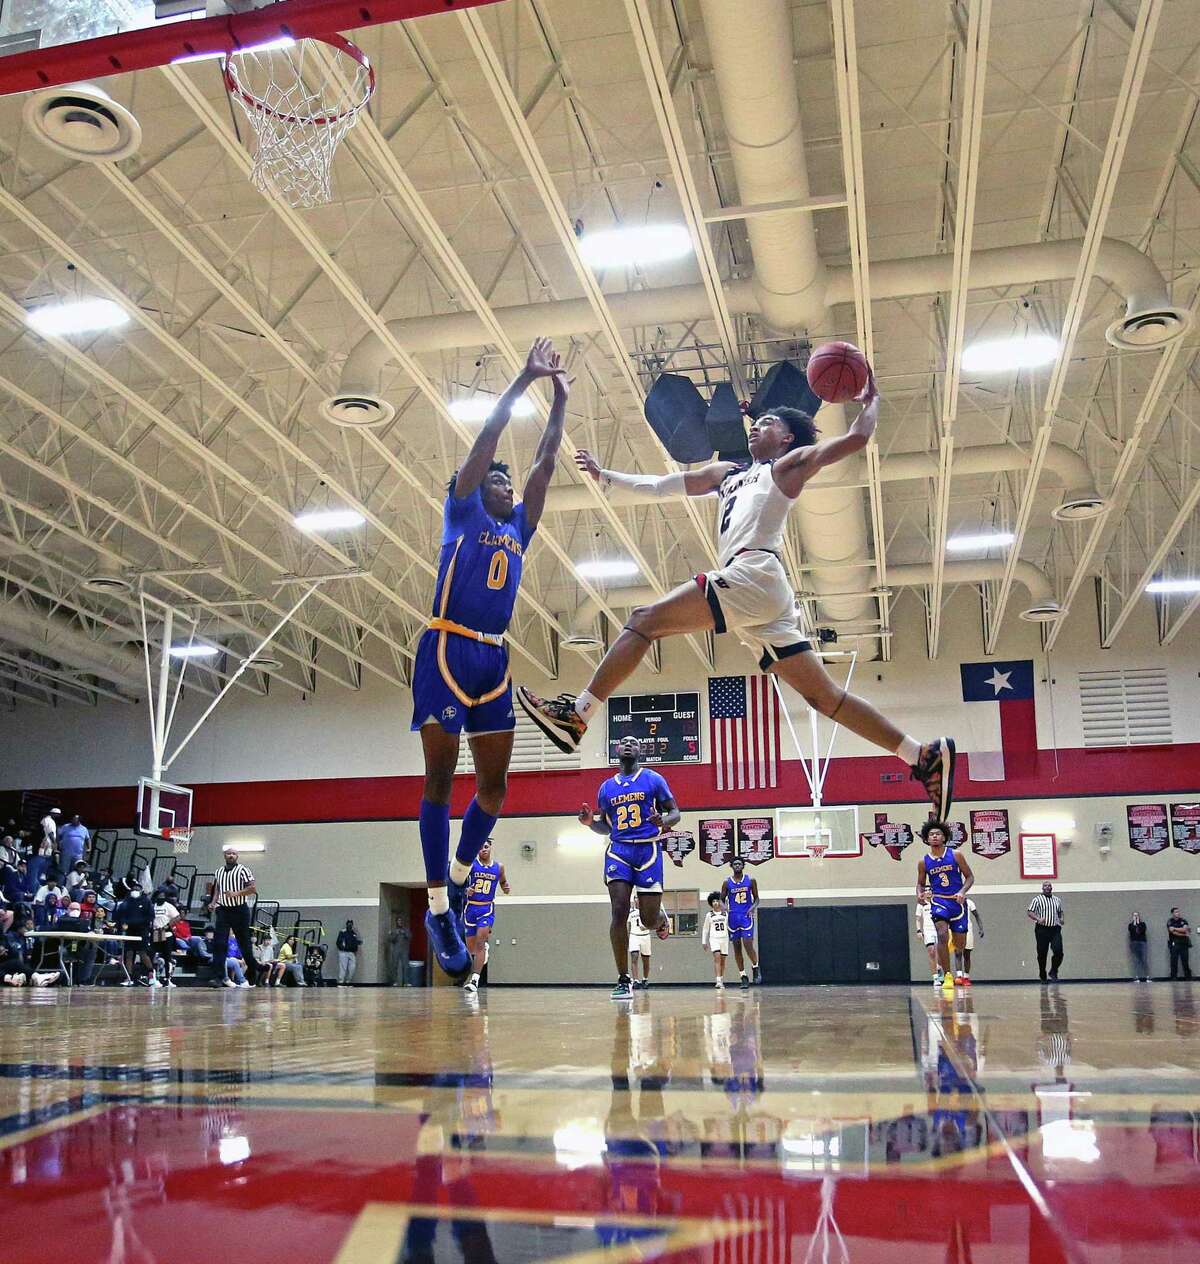 Wagner guard Austin Nunez #2 attempts a dunk over Clemens forward Theo Grant #0, however it was blocked, in the first half on Friday, Jan. 14, 2022 at Wagner HS. Wagner defeated Clemens 61-52